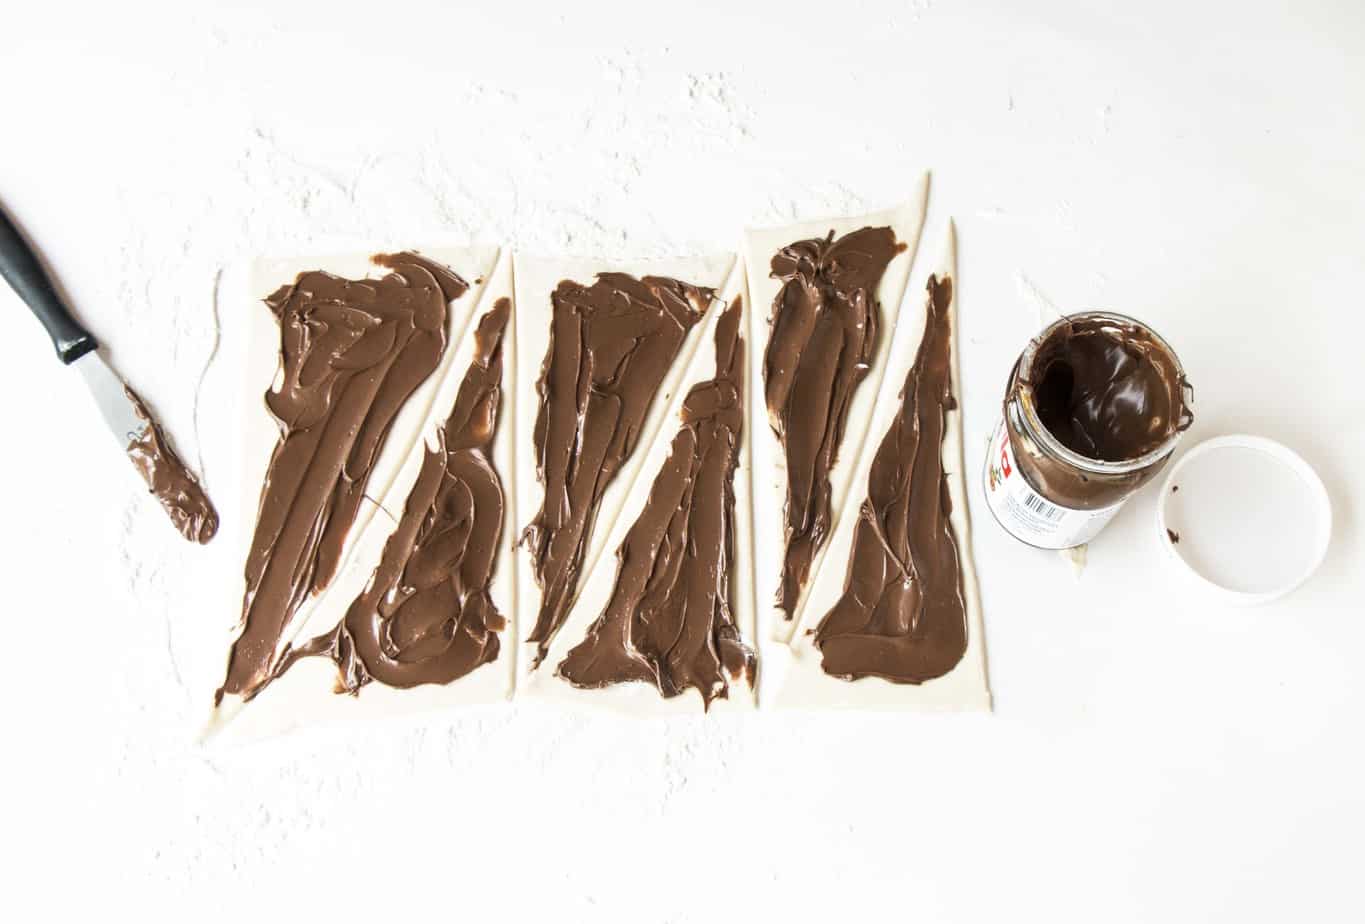 Pastry triangles spread with Nutella